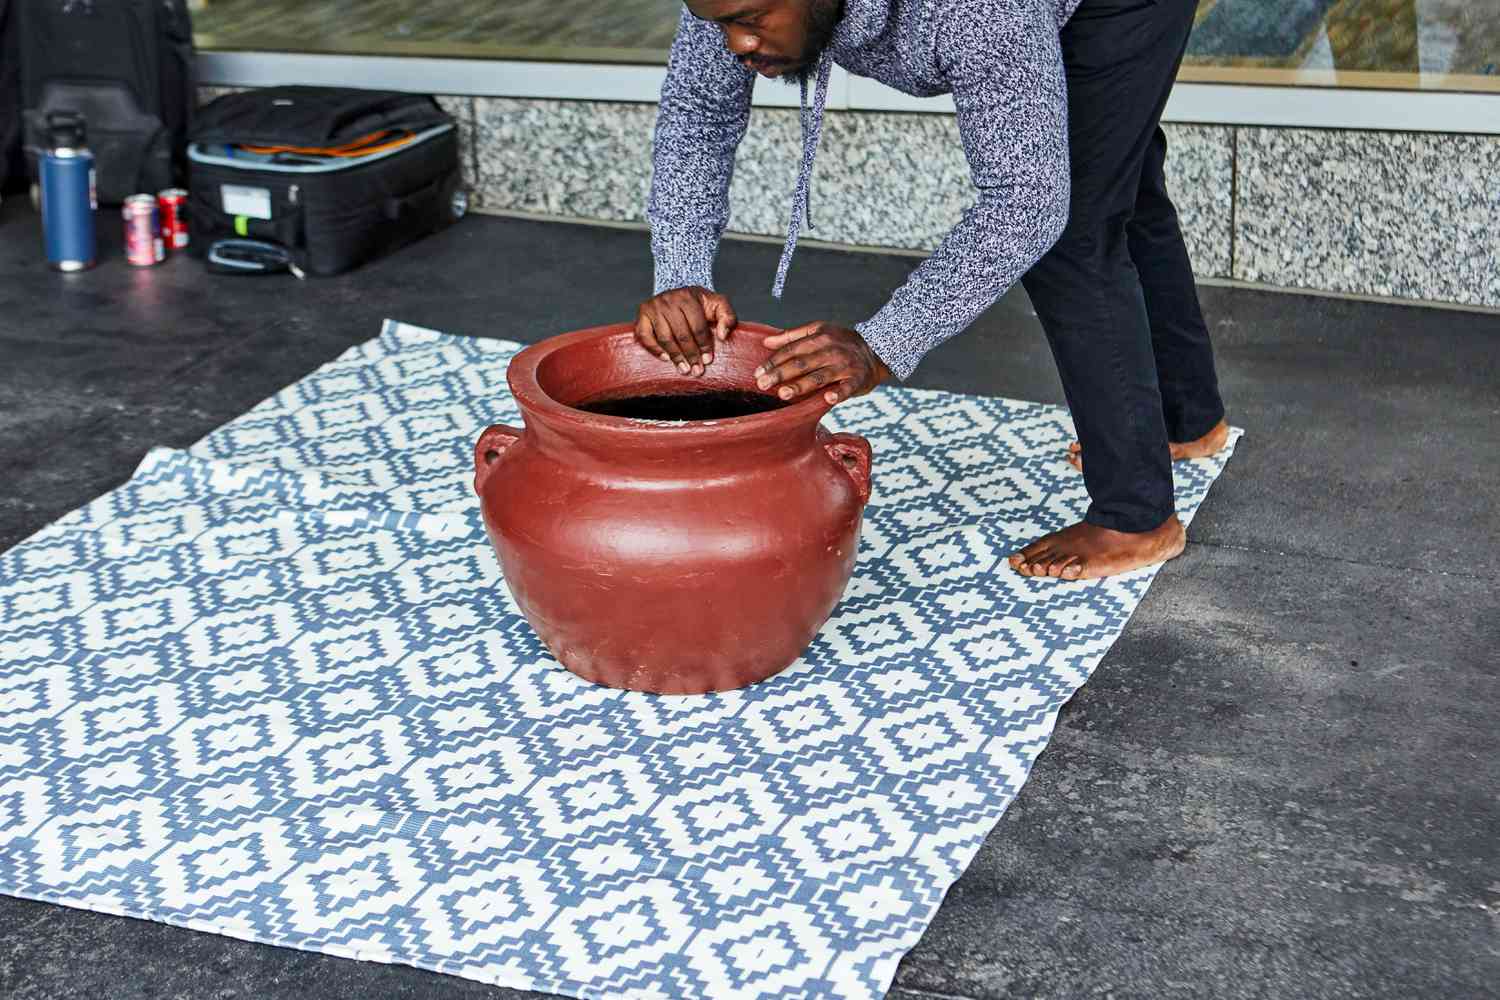 How To Make A Cheap Outdoor Rug